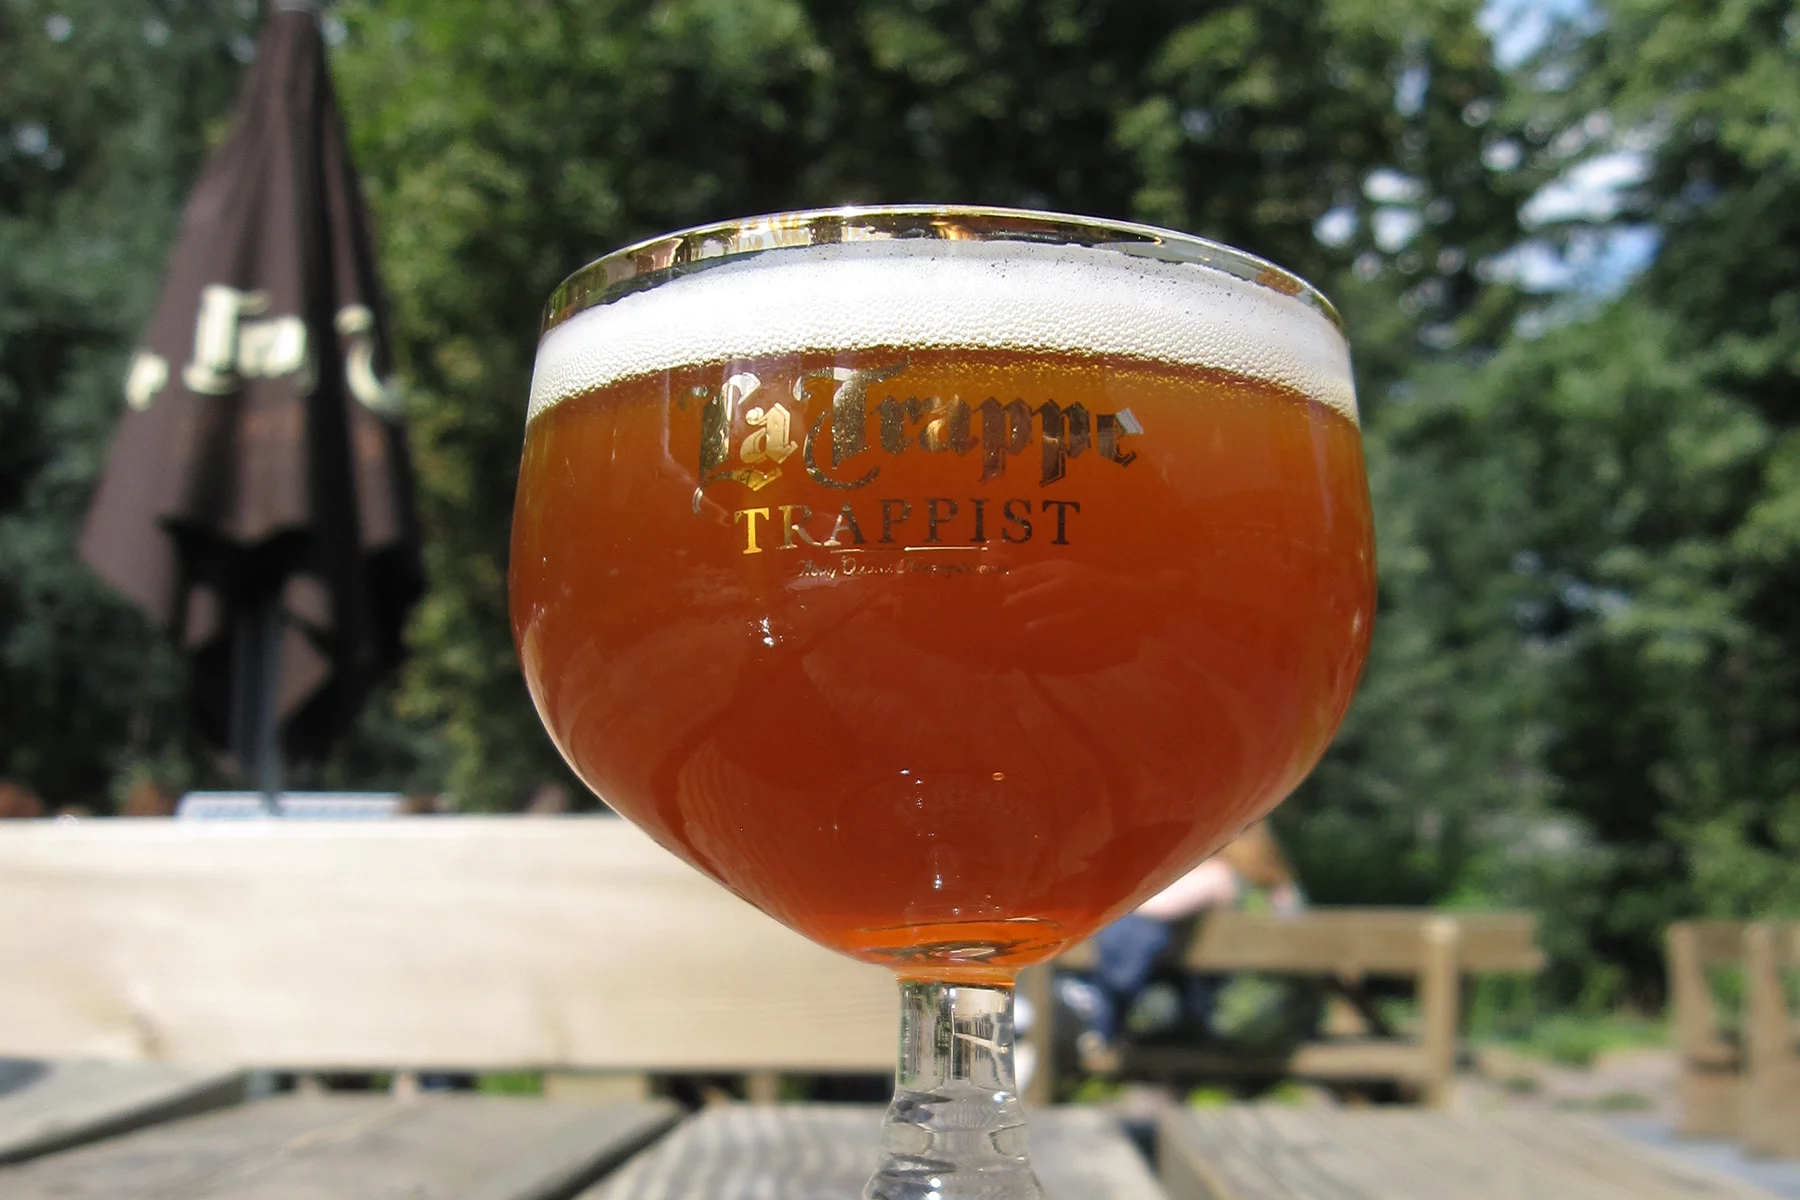 A bock beer from La Trappe (Photo: Bernt Rostad / Flickr)